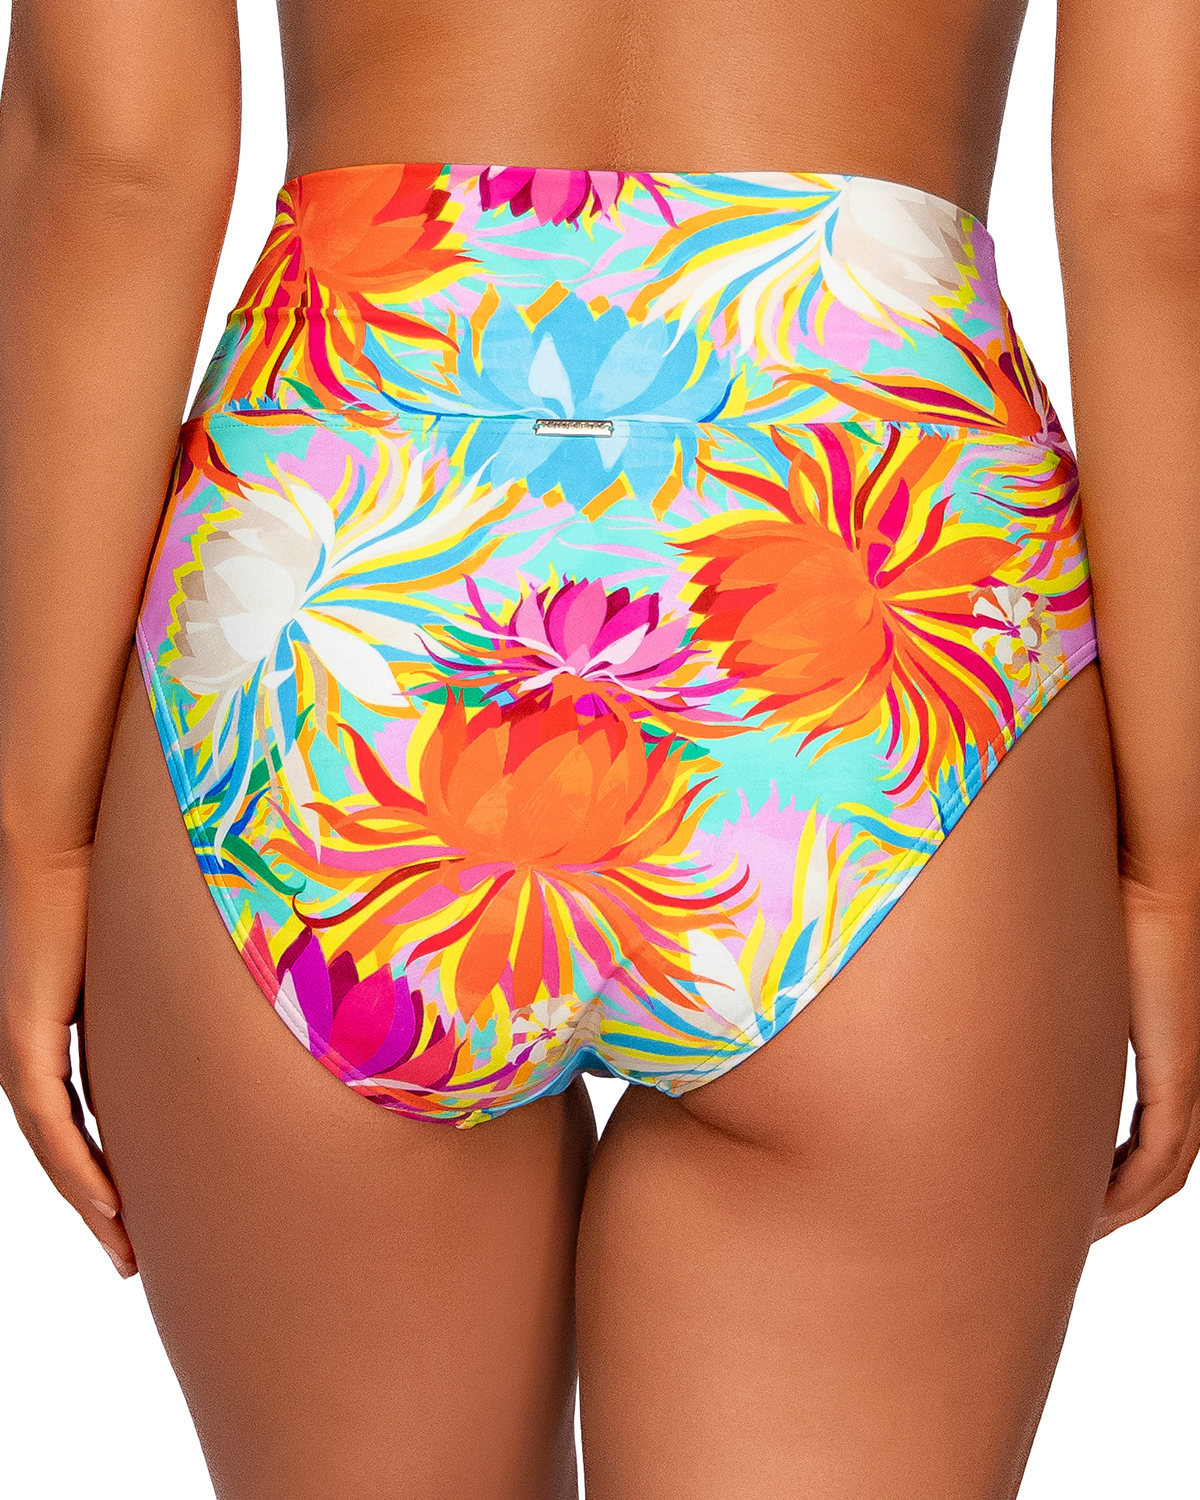 Model wearing a high waist fold over bottom in a orange, yellow, turquoise and pink floral print.